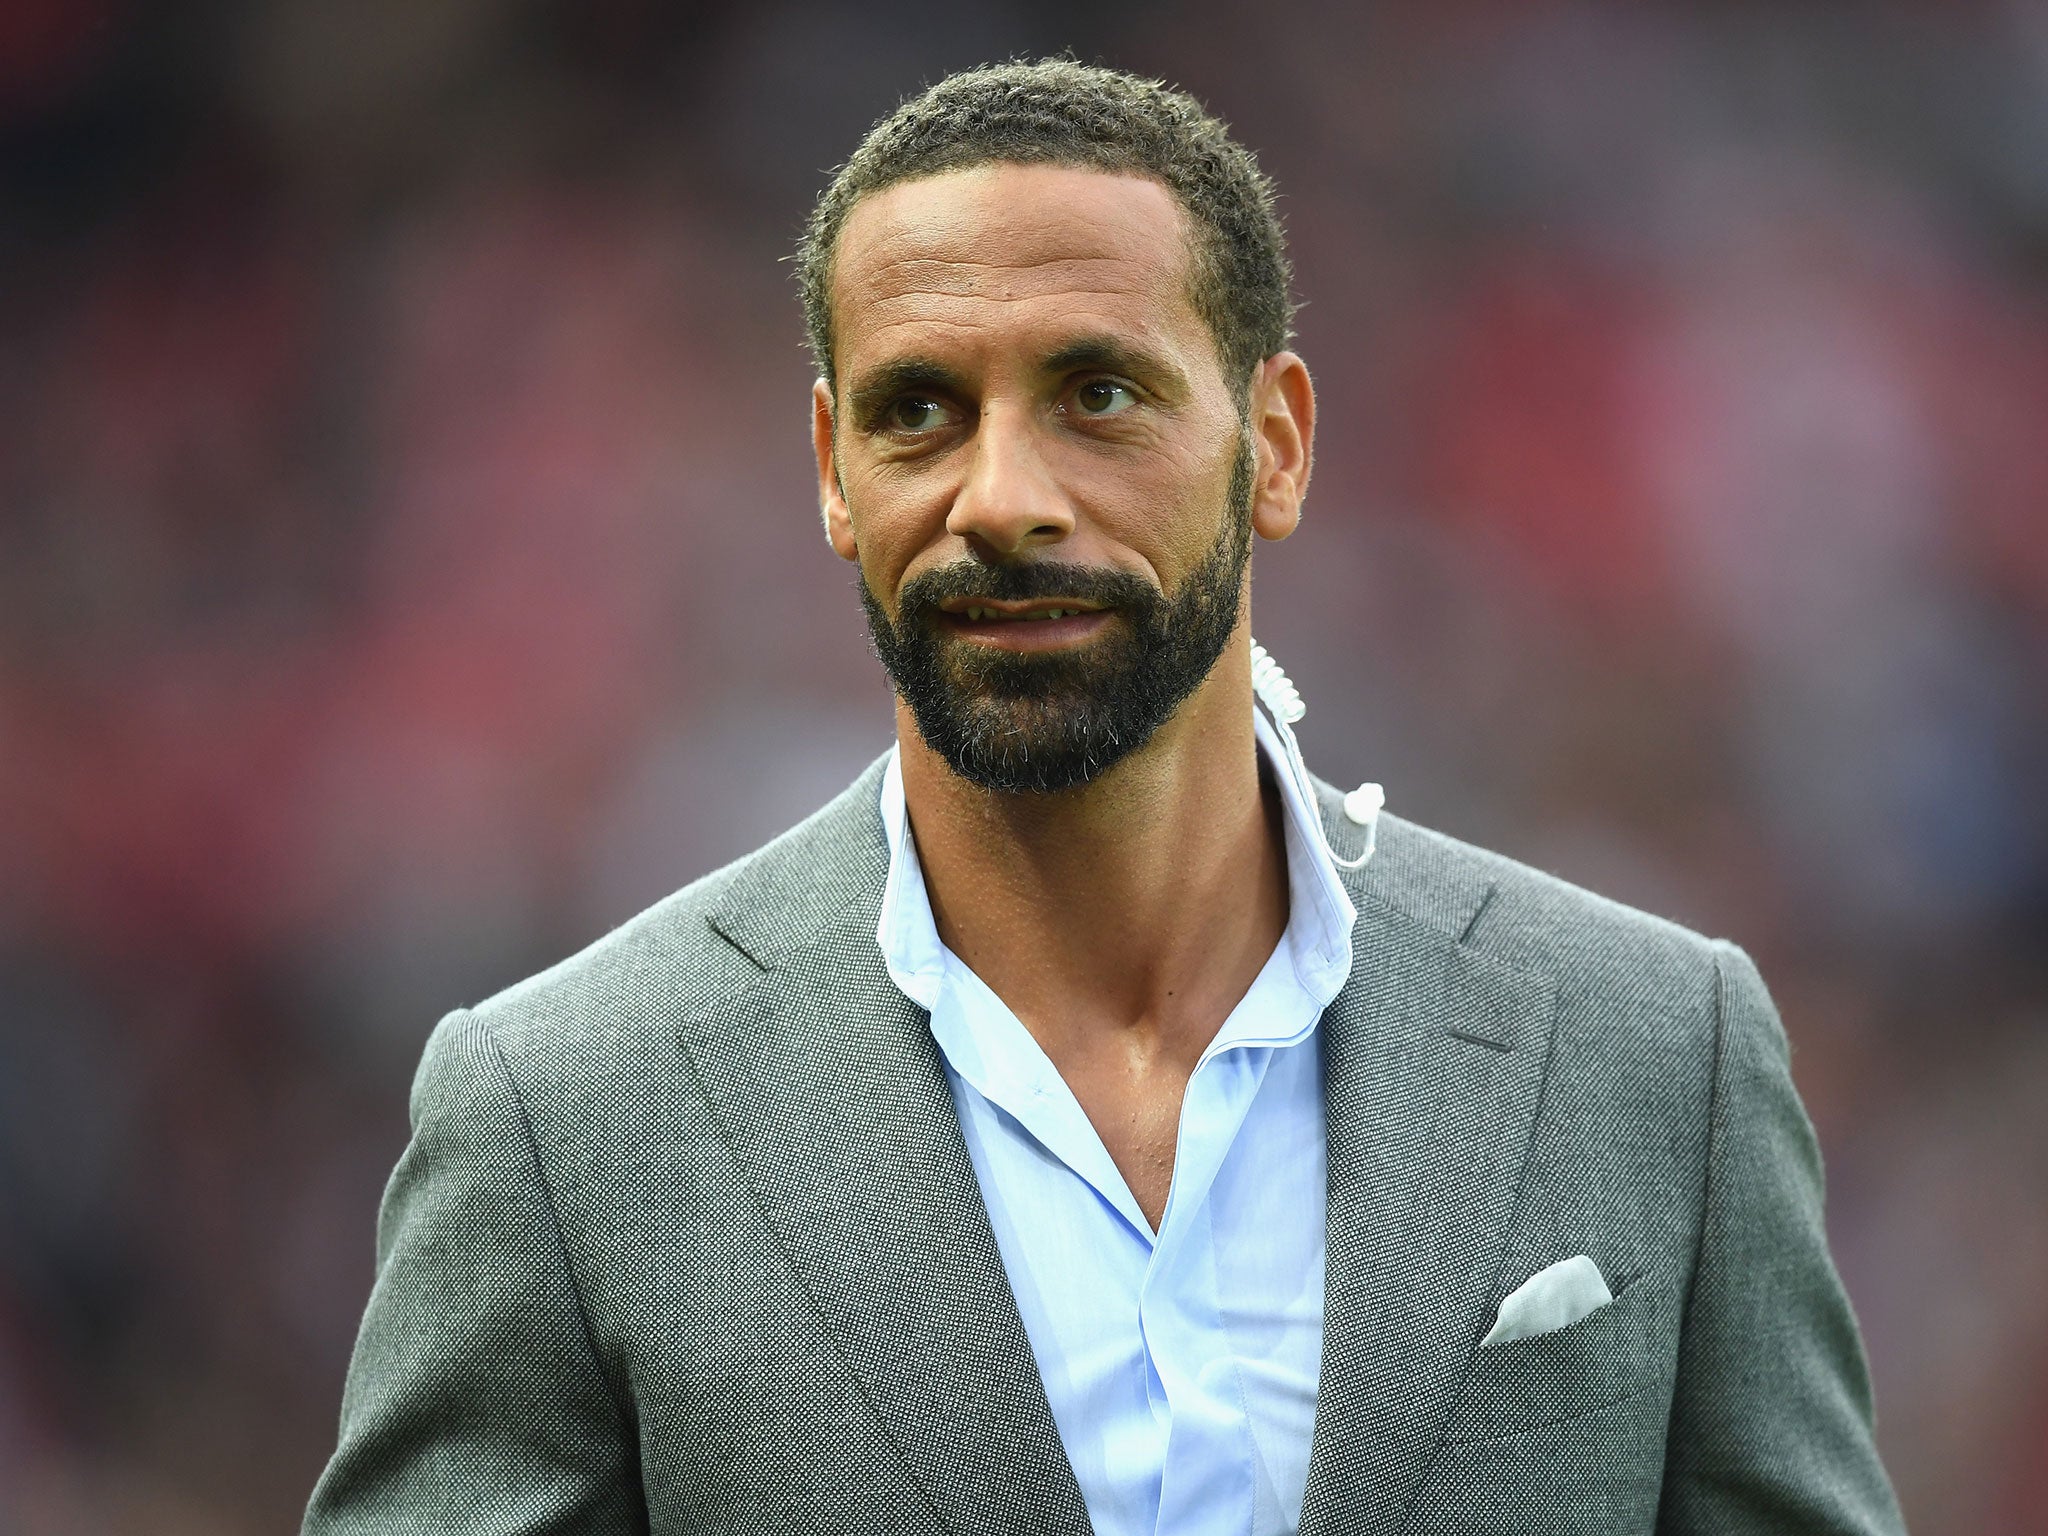 Rio Ferdinand has said United need to make a move for the pair should they become available